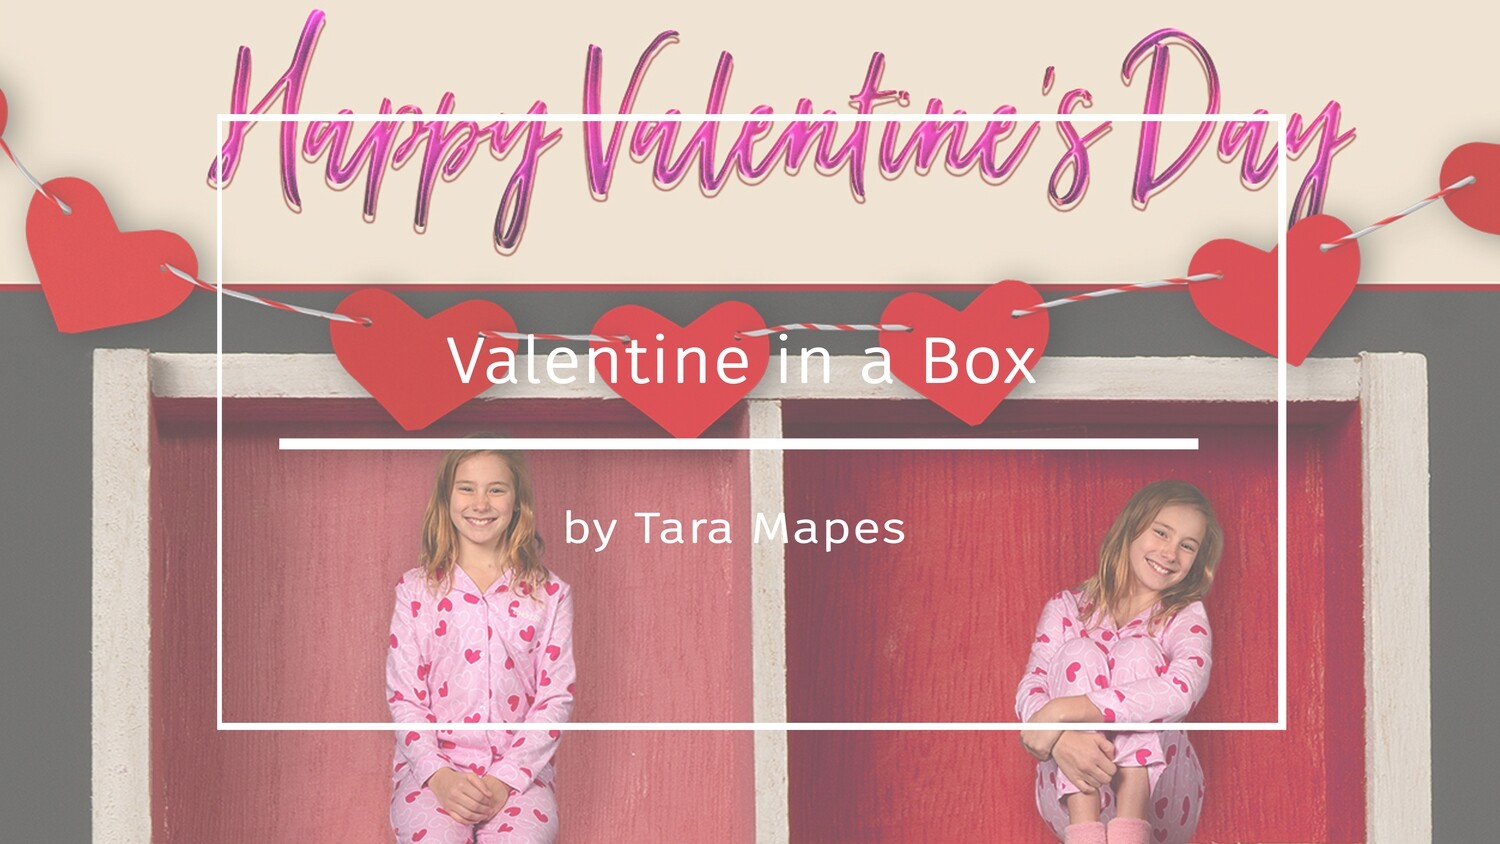 Valentine in a Box Tutorial - How to Shoot and Blend into a Box Template in Photoshop Compositing Tutorial by Tara Mapes Enchanted Eye Creations